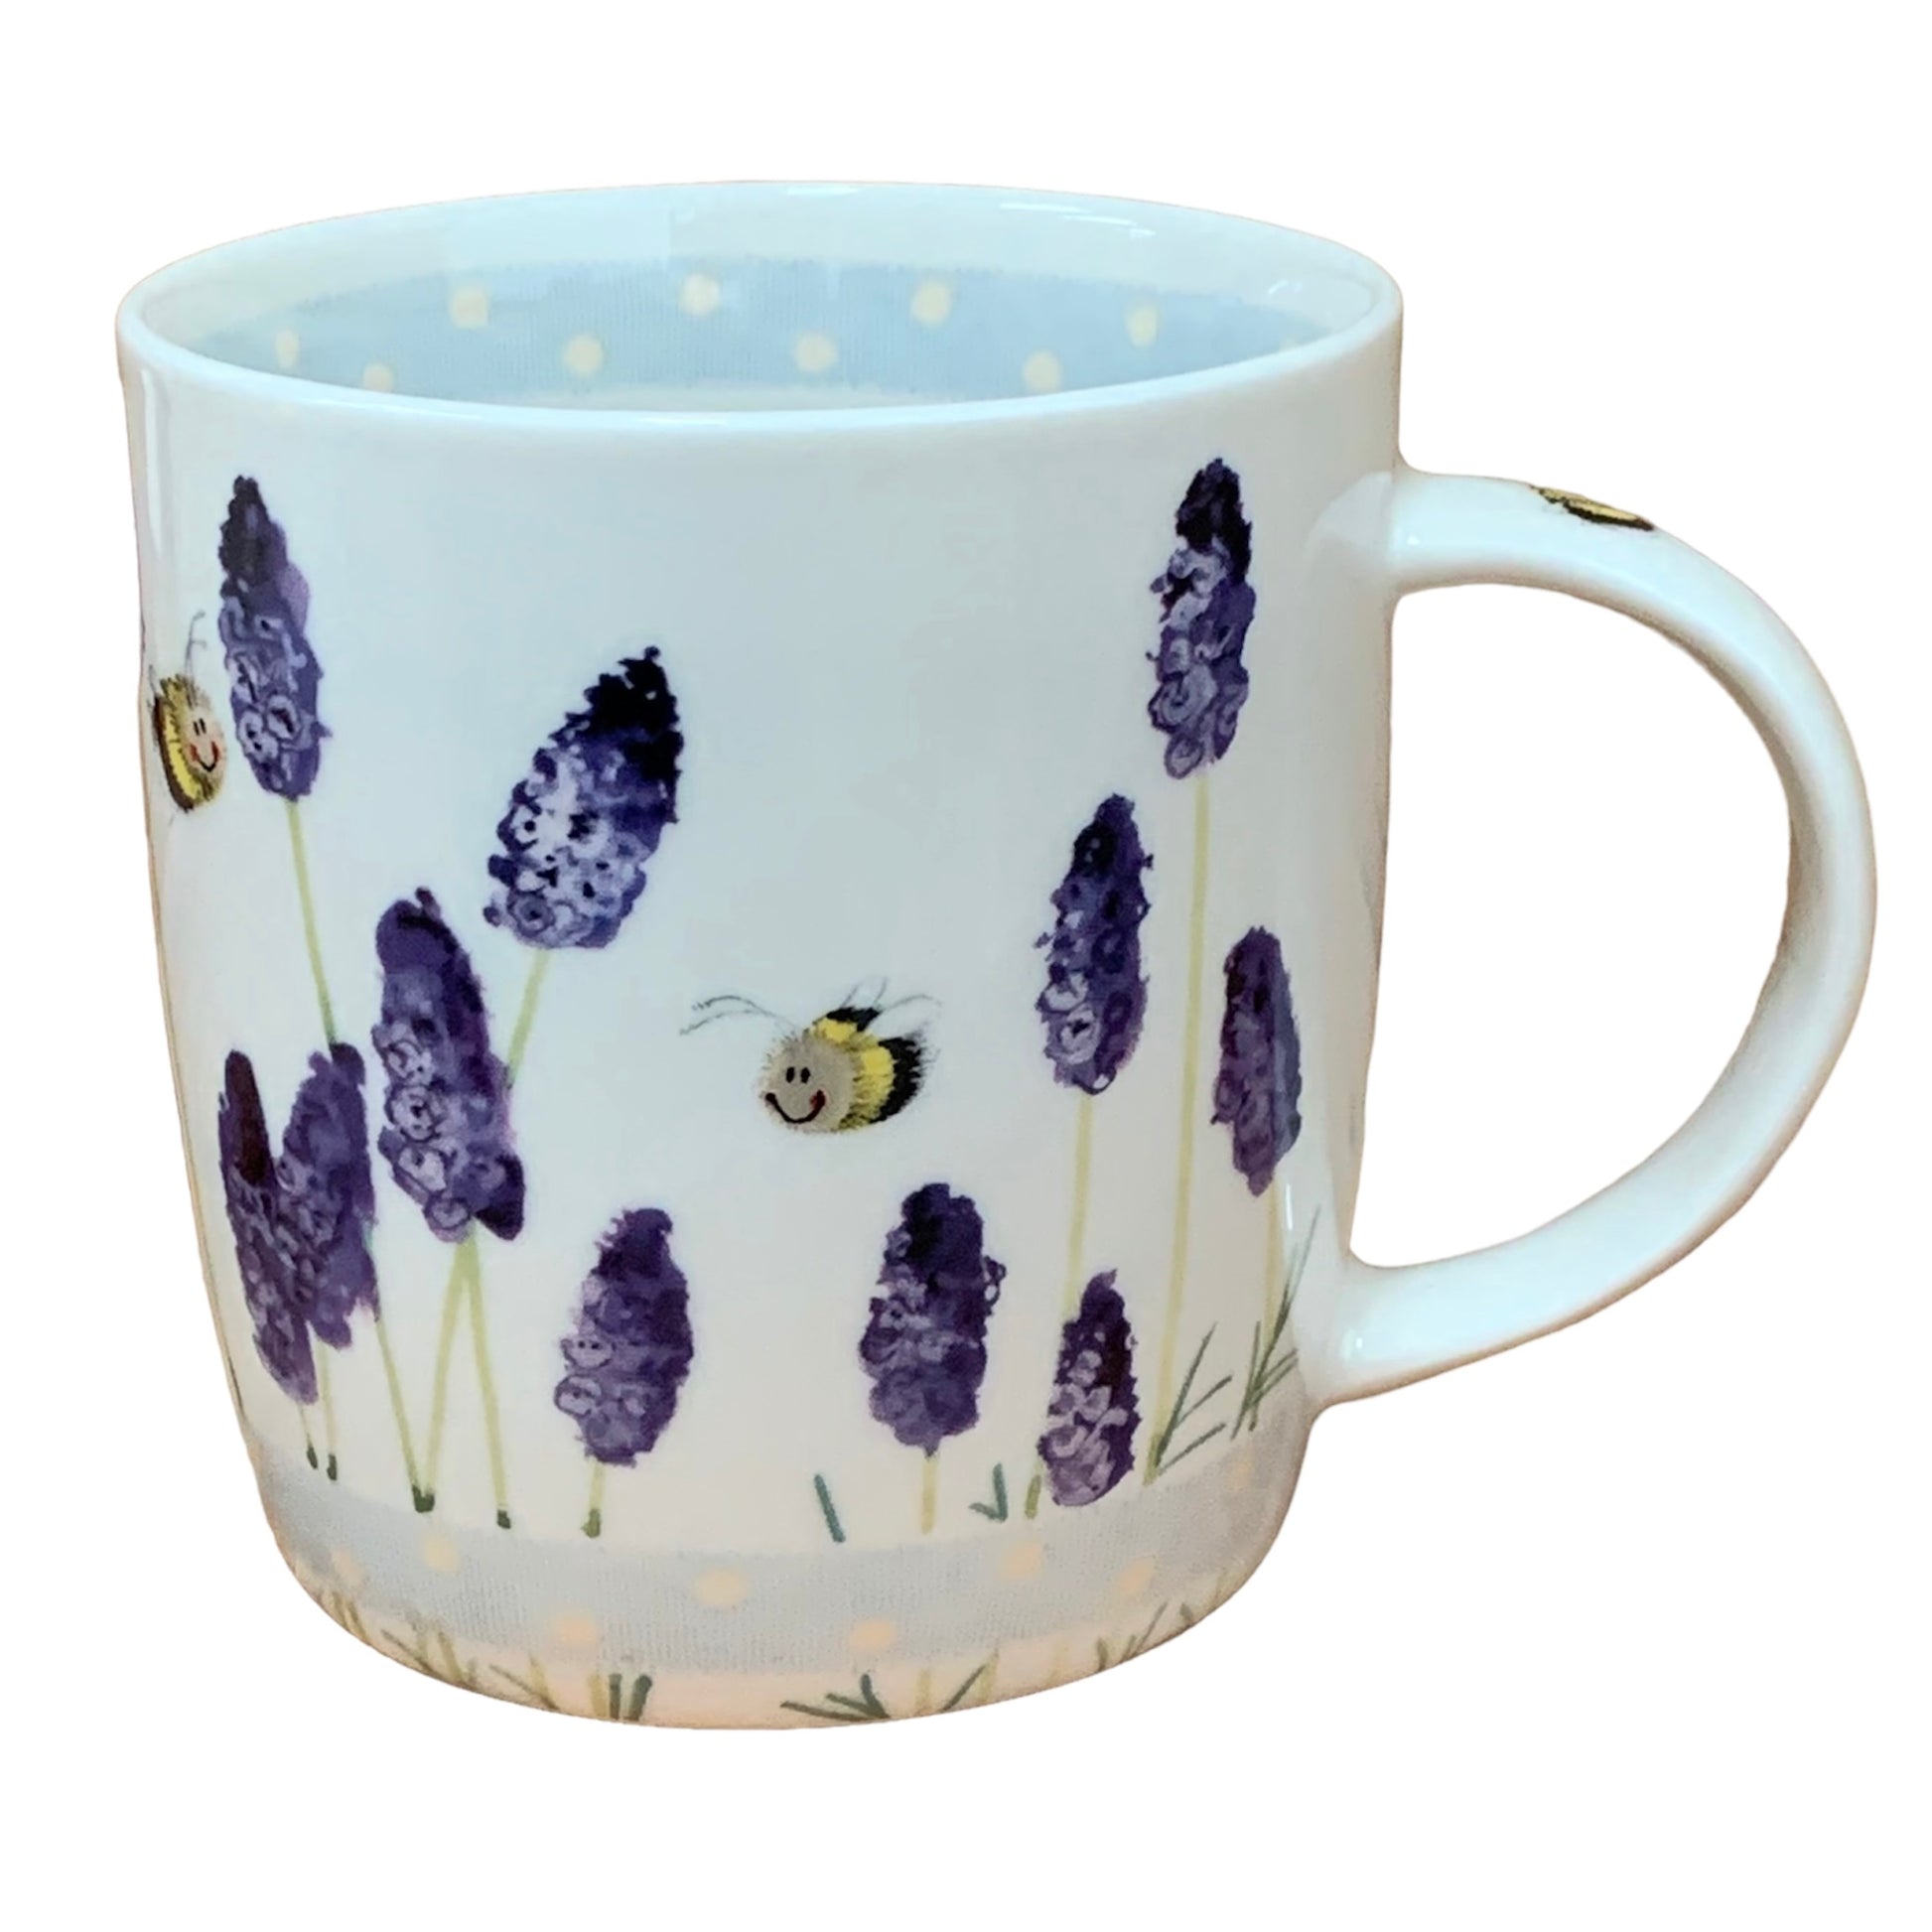 This Alex Clark mug is illustrated with lovely bumble bees hoovering over lavender flowers.  This mug also features a illustration around the inside rim & illustrations down the handle.